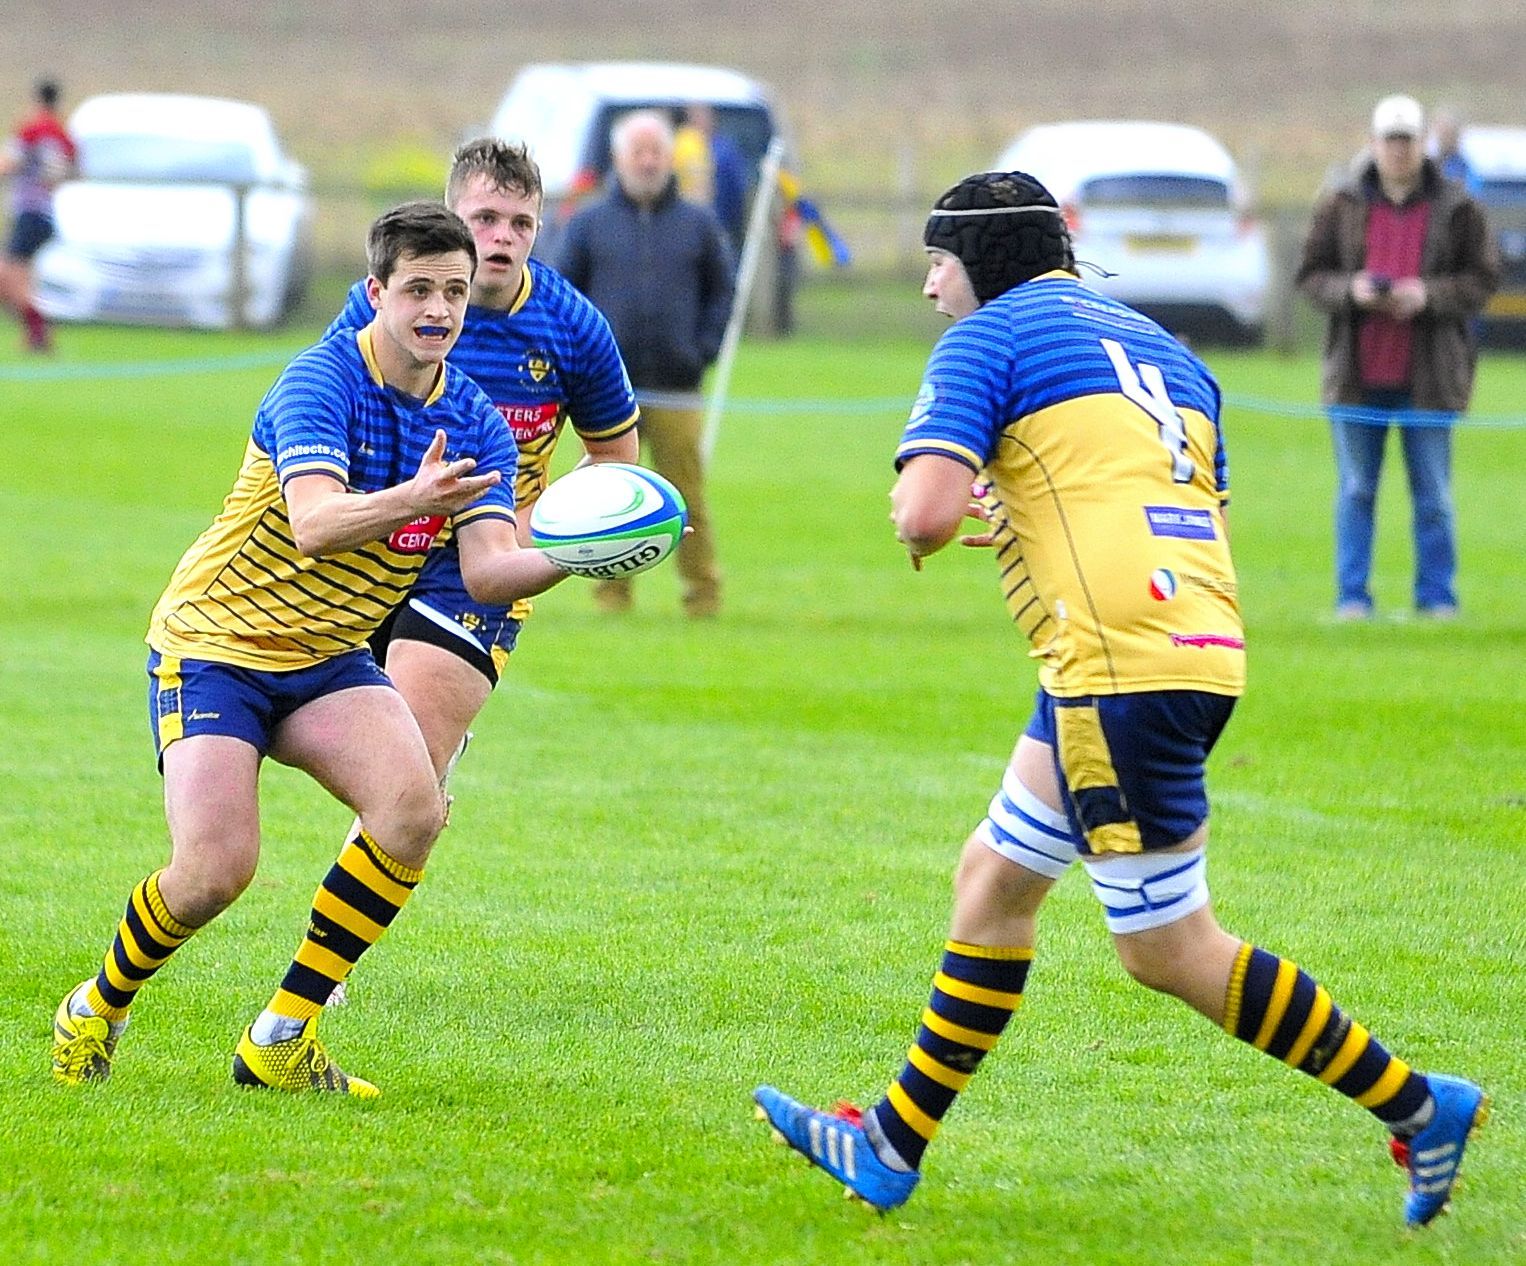 PICTURE GALLERY: Worcester Wanderers move up table with Dudley Kingswinford win - Worcester News